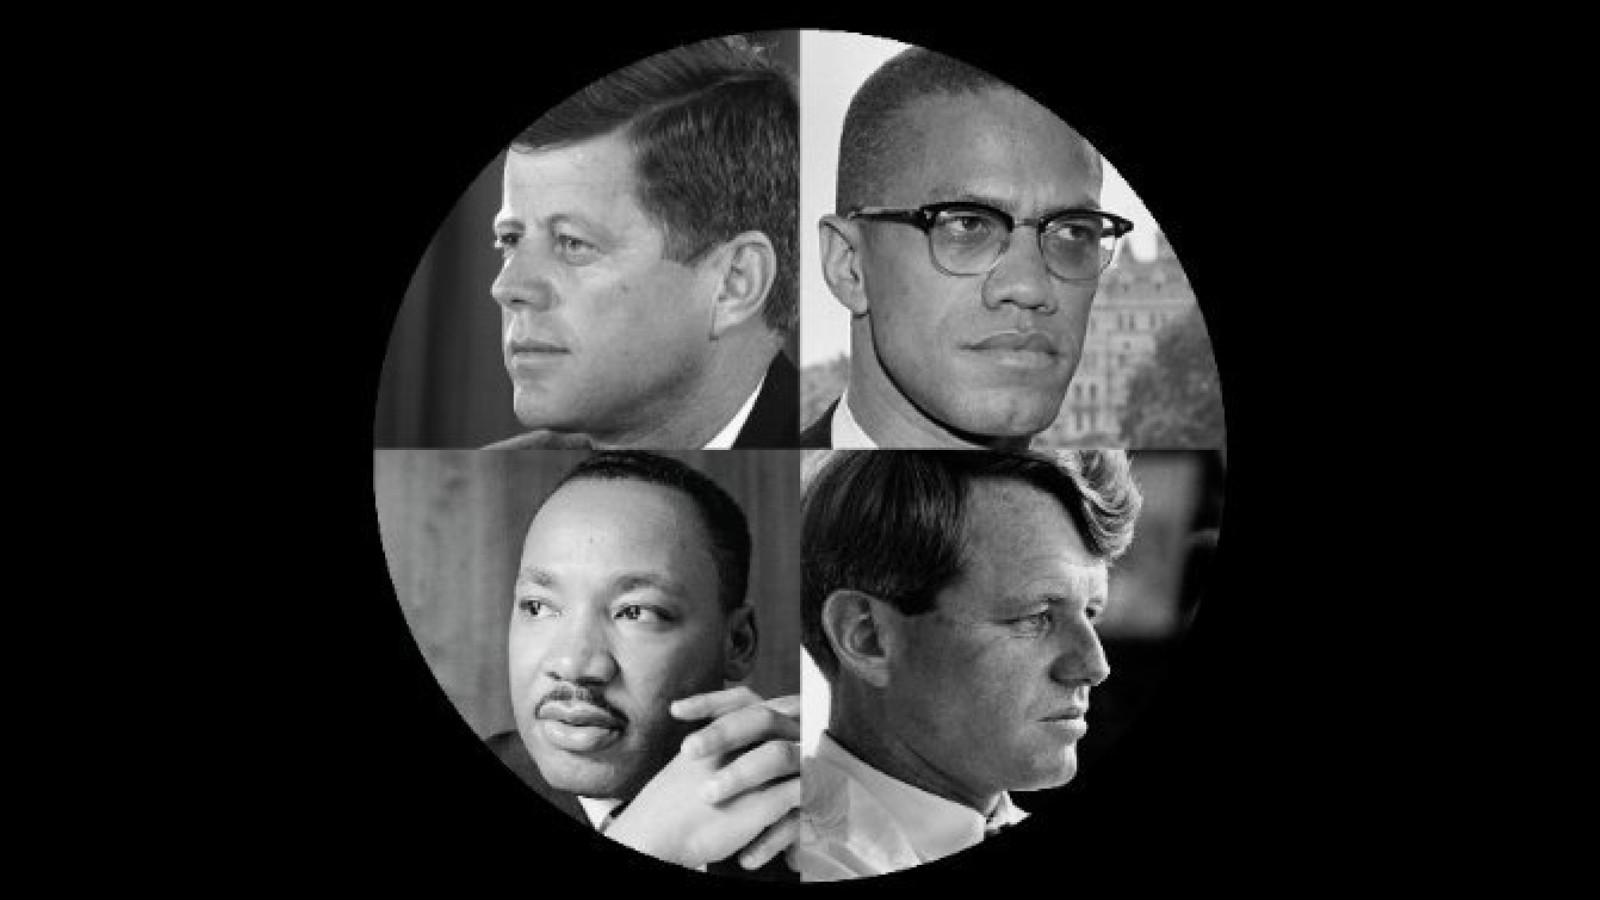 Images of President John F Kennedy, Malcolm X, Martin Luther King, Jr, and Senator Robert Kennedy